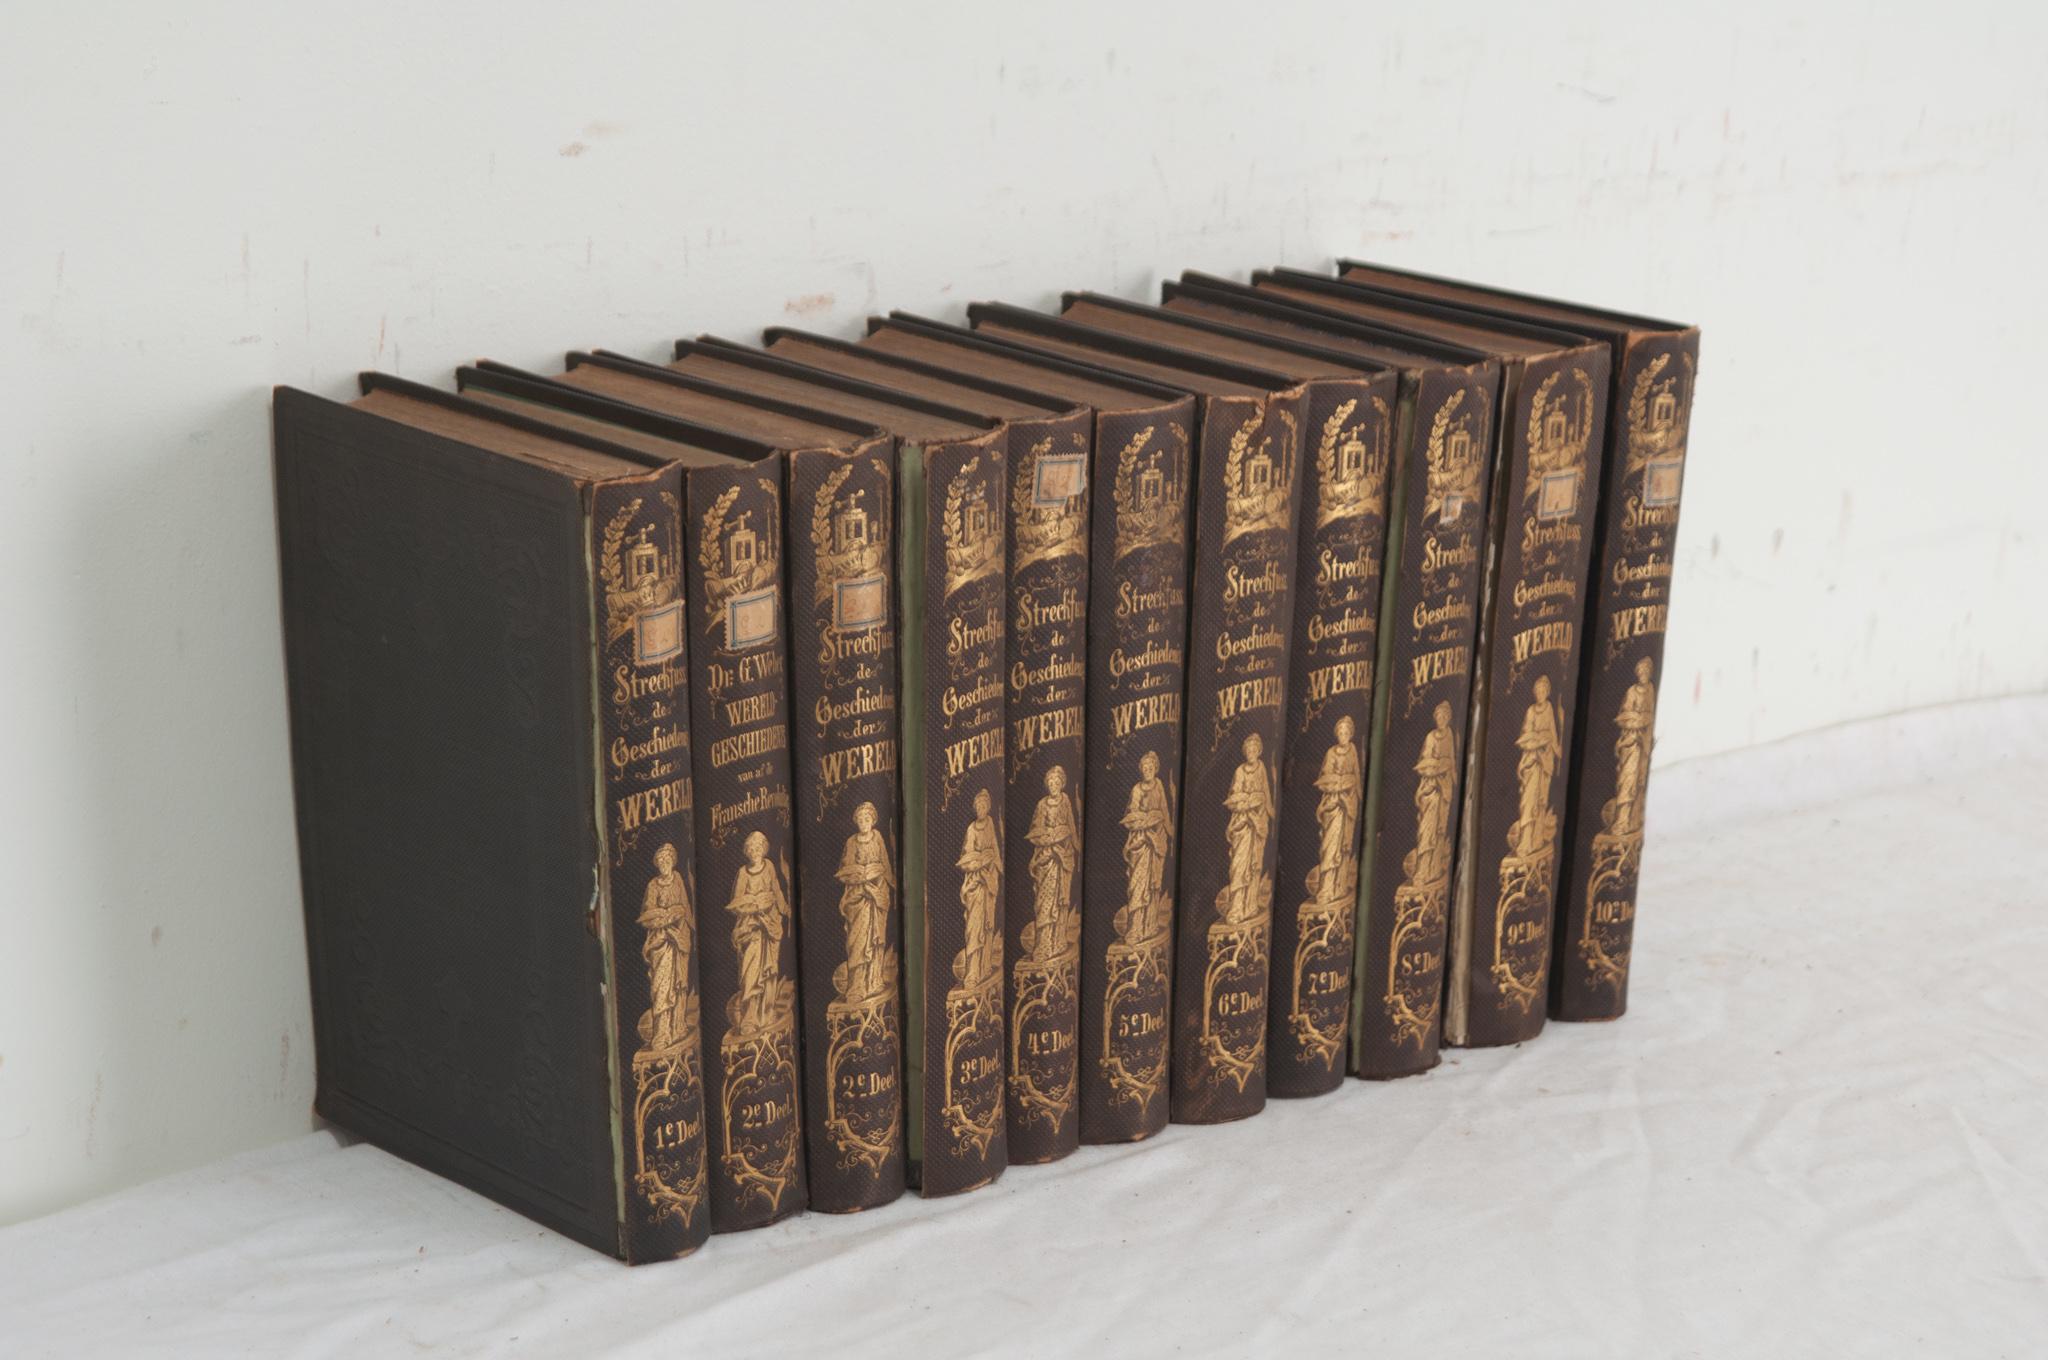 Hand-Crafted Set of 11 French History Books